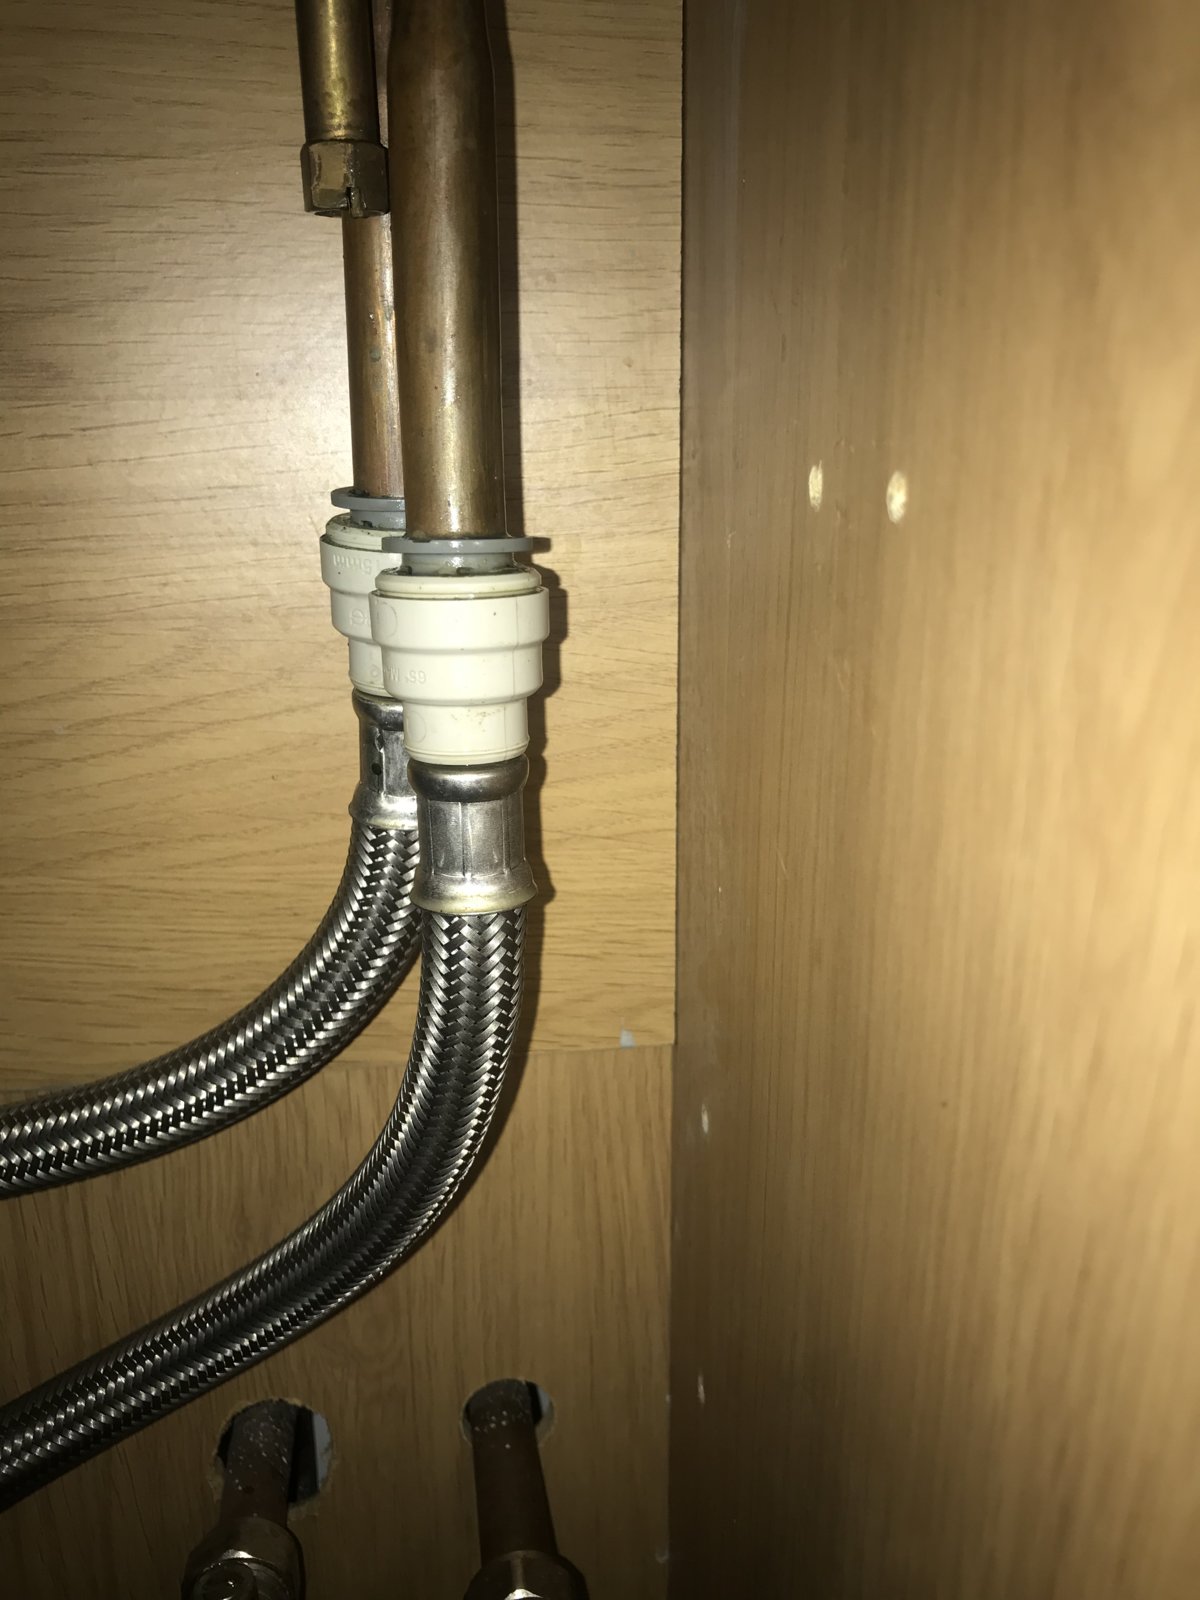 How To Use Push Fit Plumbing Fittings